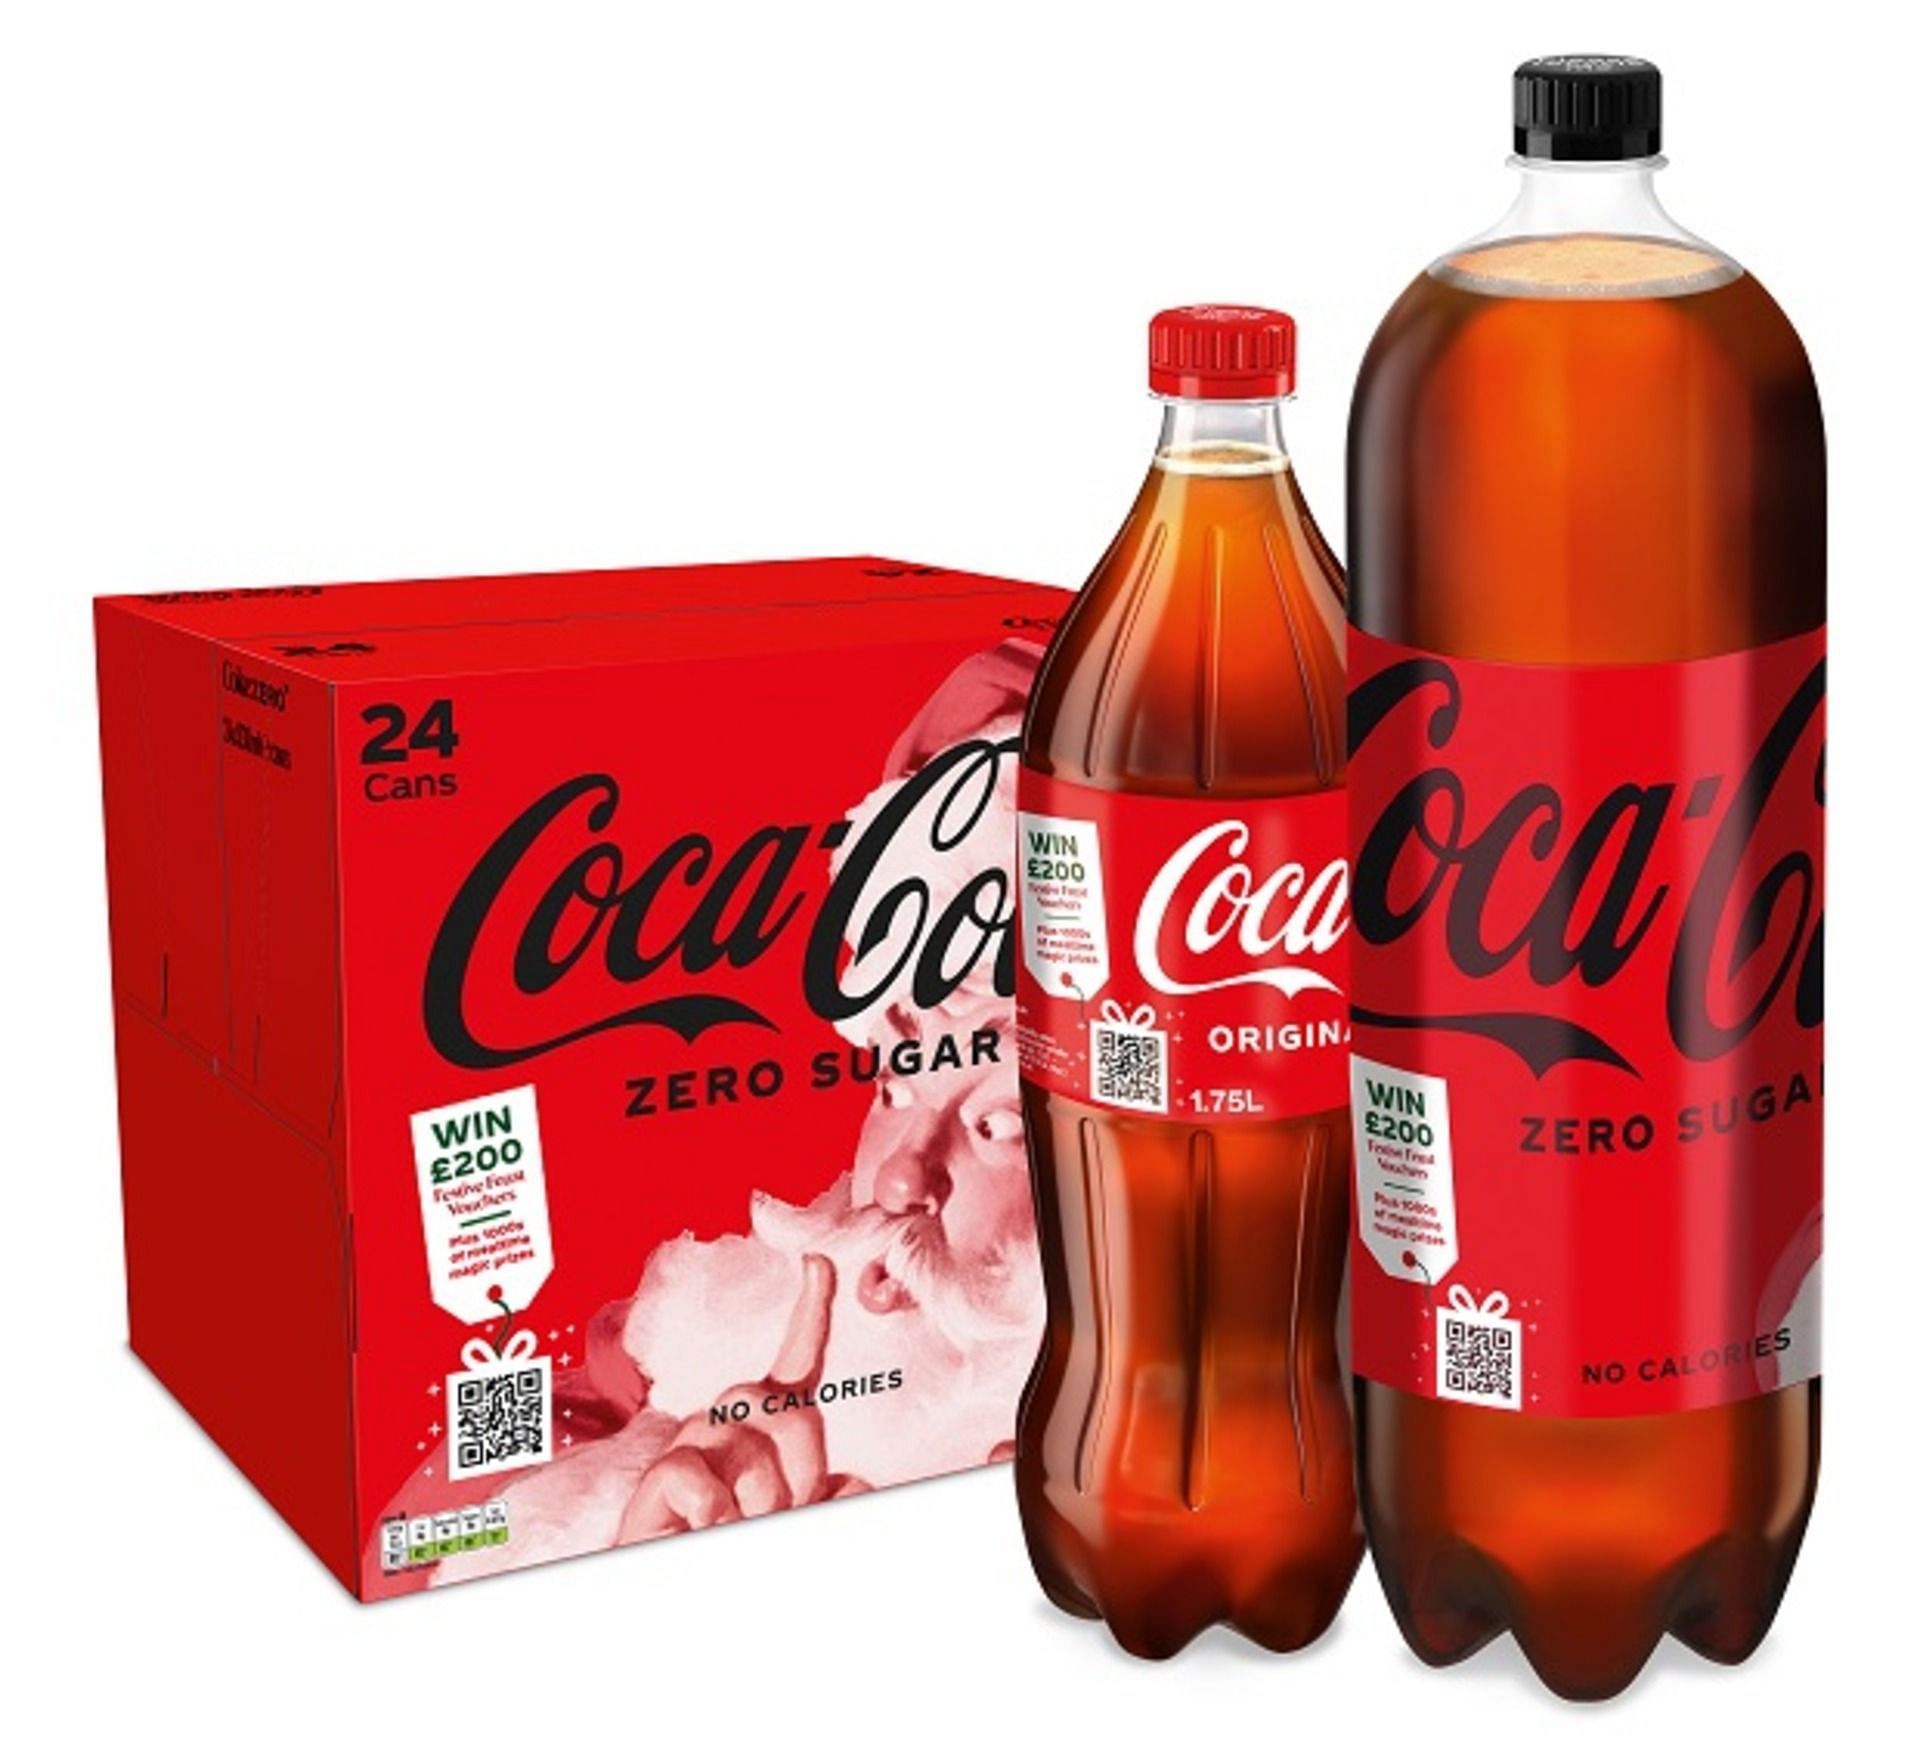 New Packaging and bottles (Image via Coca-Cola)